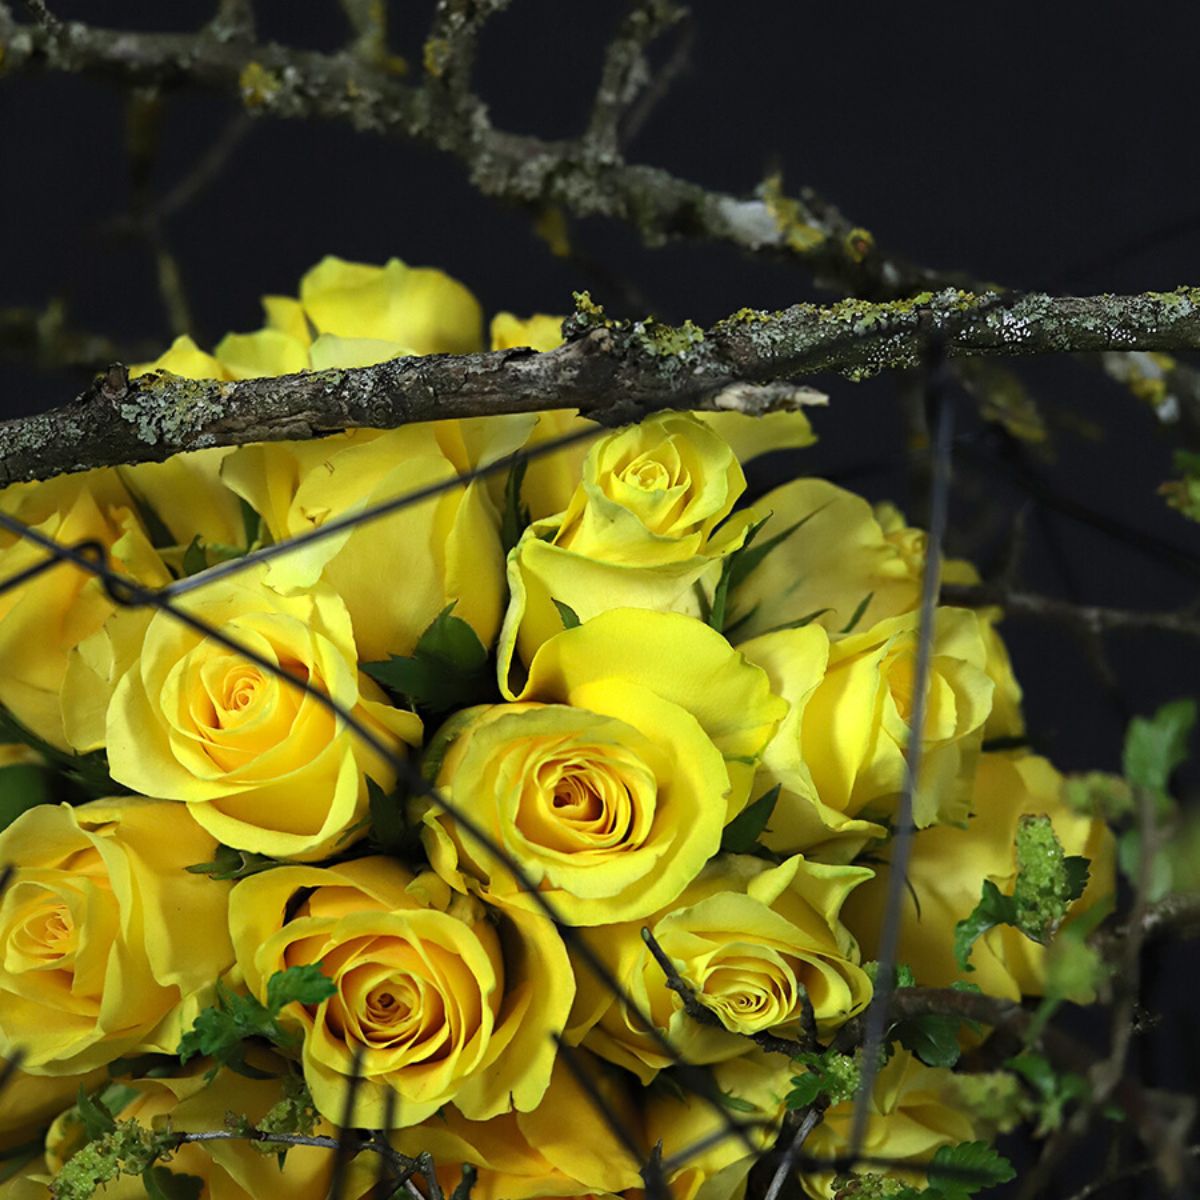 Rise and shine yellow rose featured